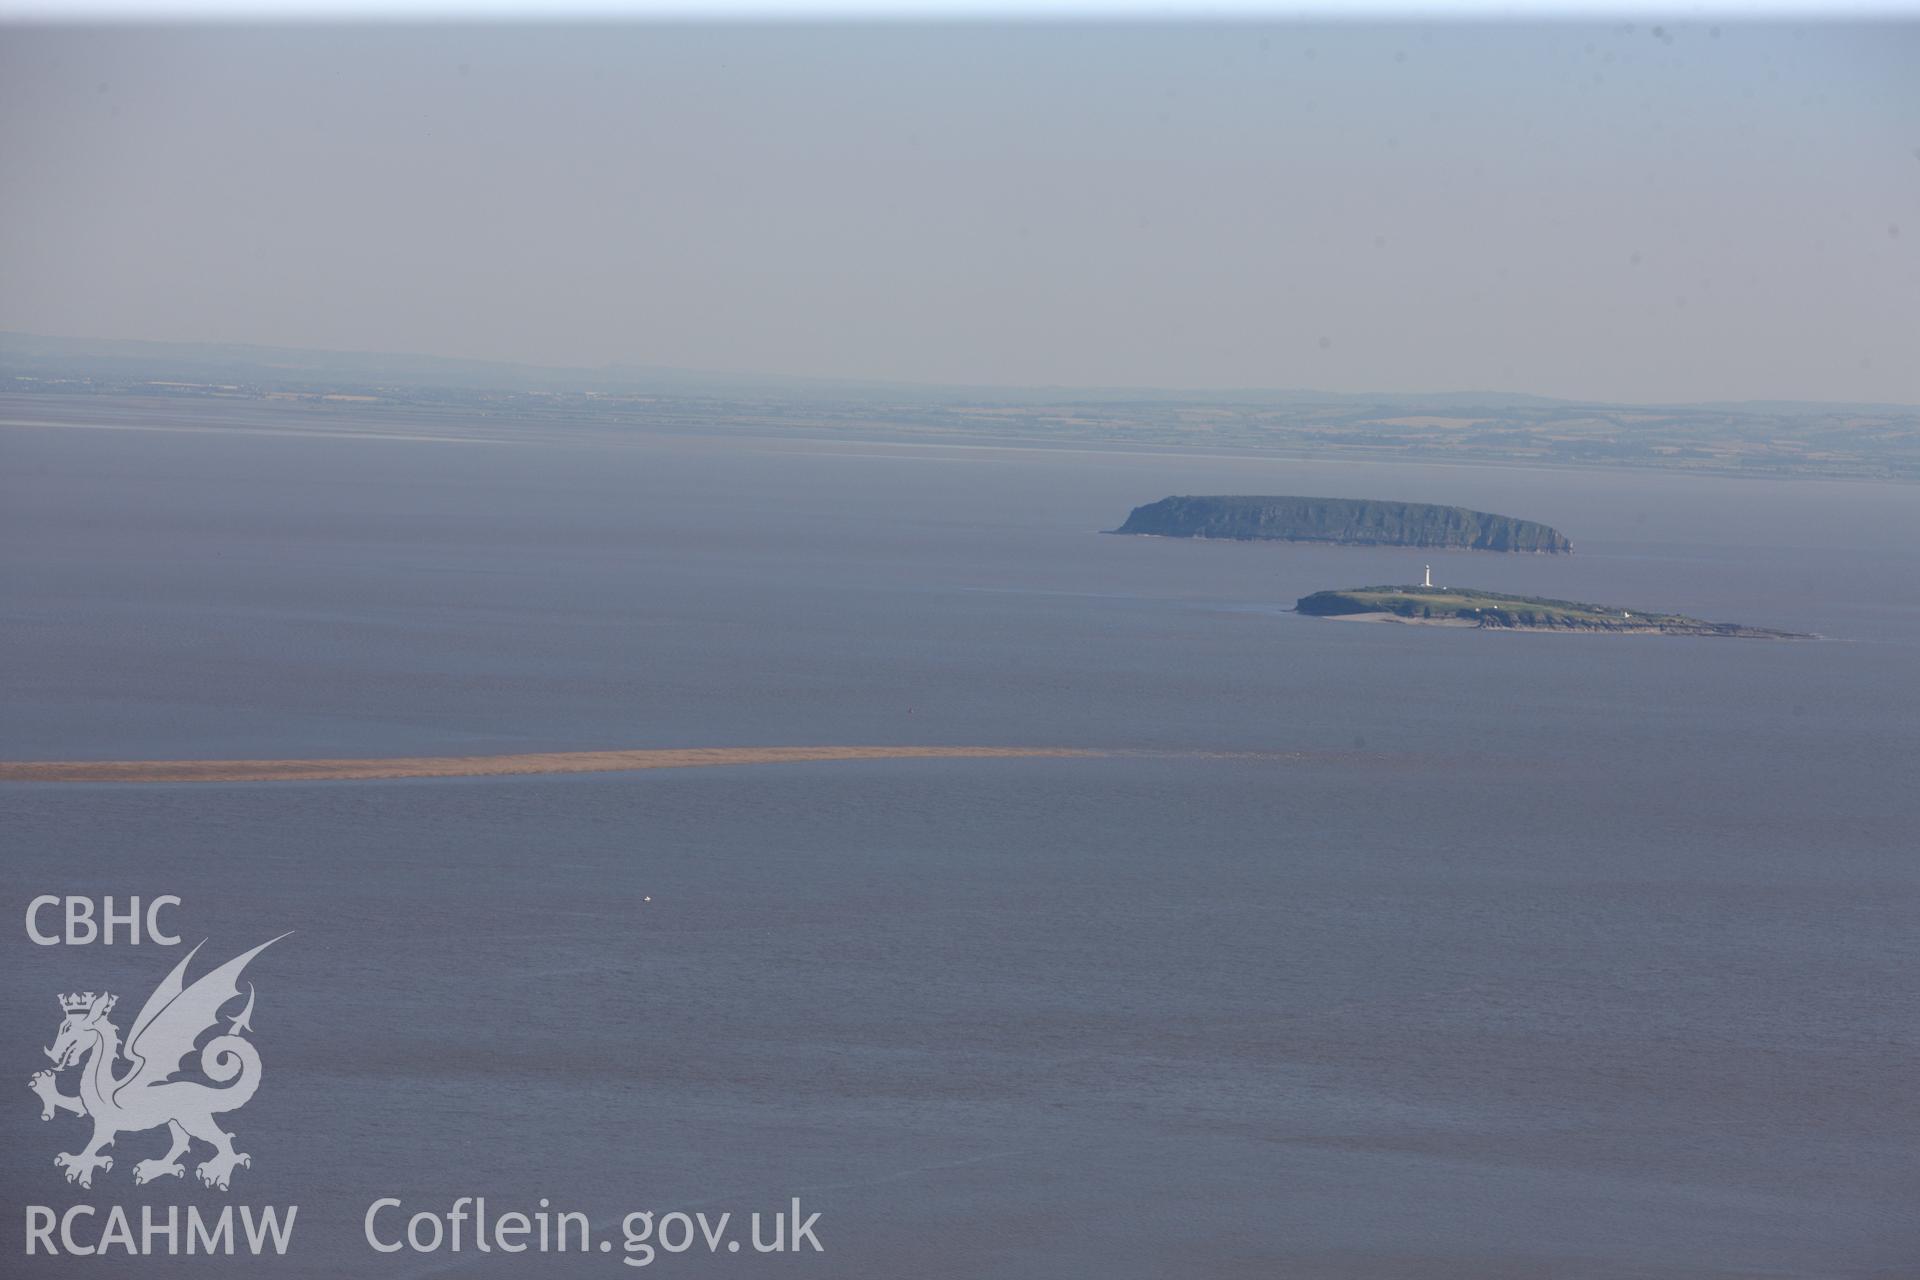 RCAHMW colour oblique photograph of Flat Holm Island, view from north-east. Taken by Toby Driver on 24/07/2012.